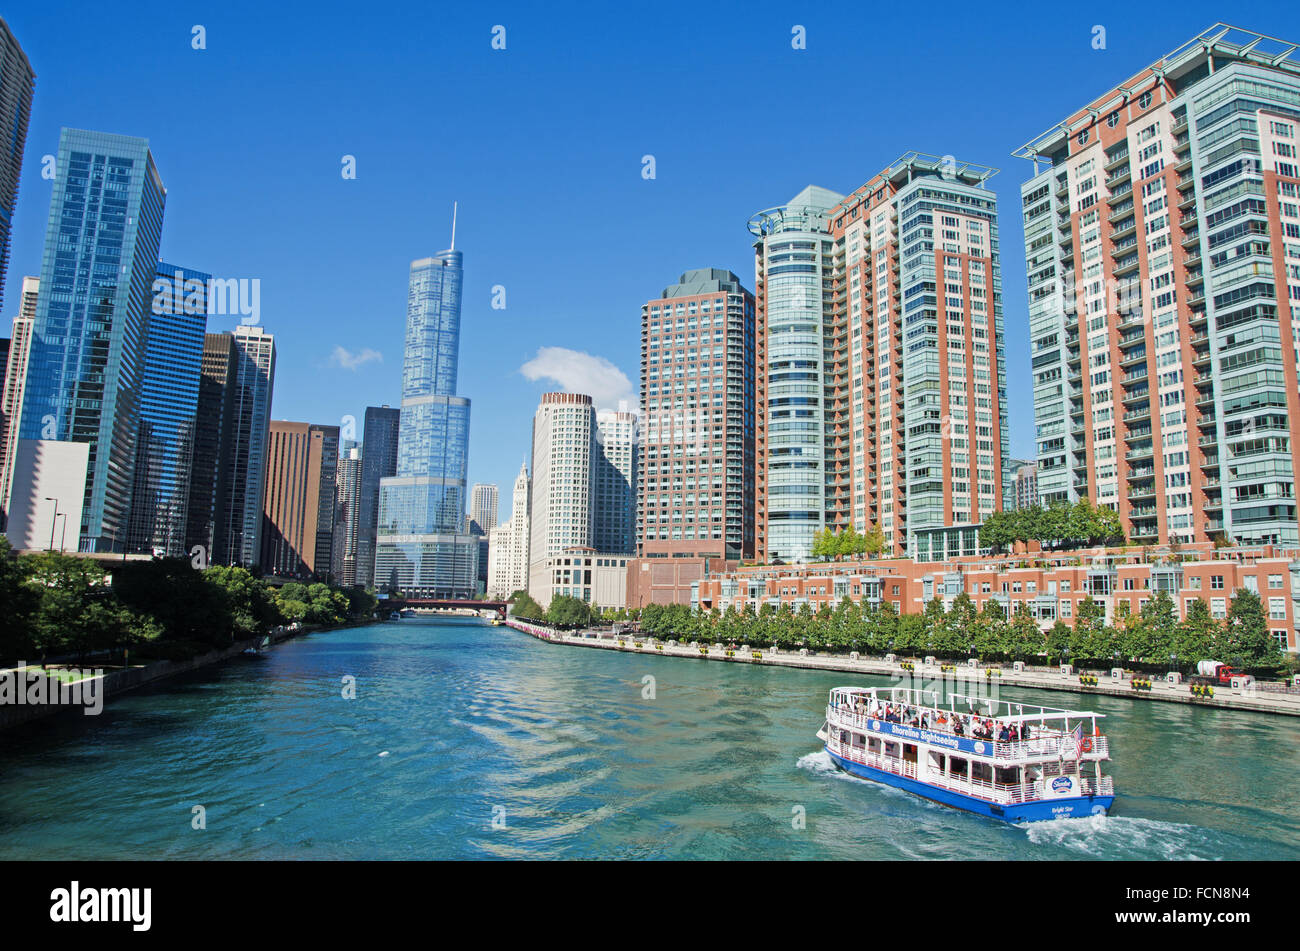 Chicago, Michigan Lake, Illinois, United States of America, Usa, canal cruise on Chicago River, skyline and Trump tower Stock Photo